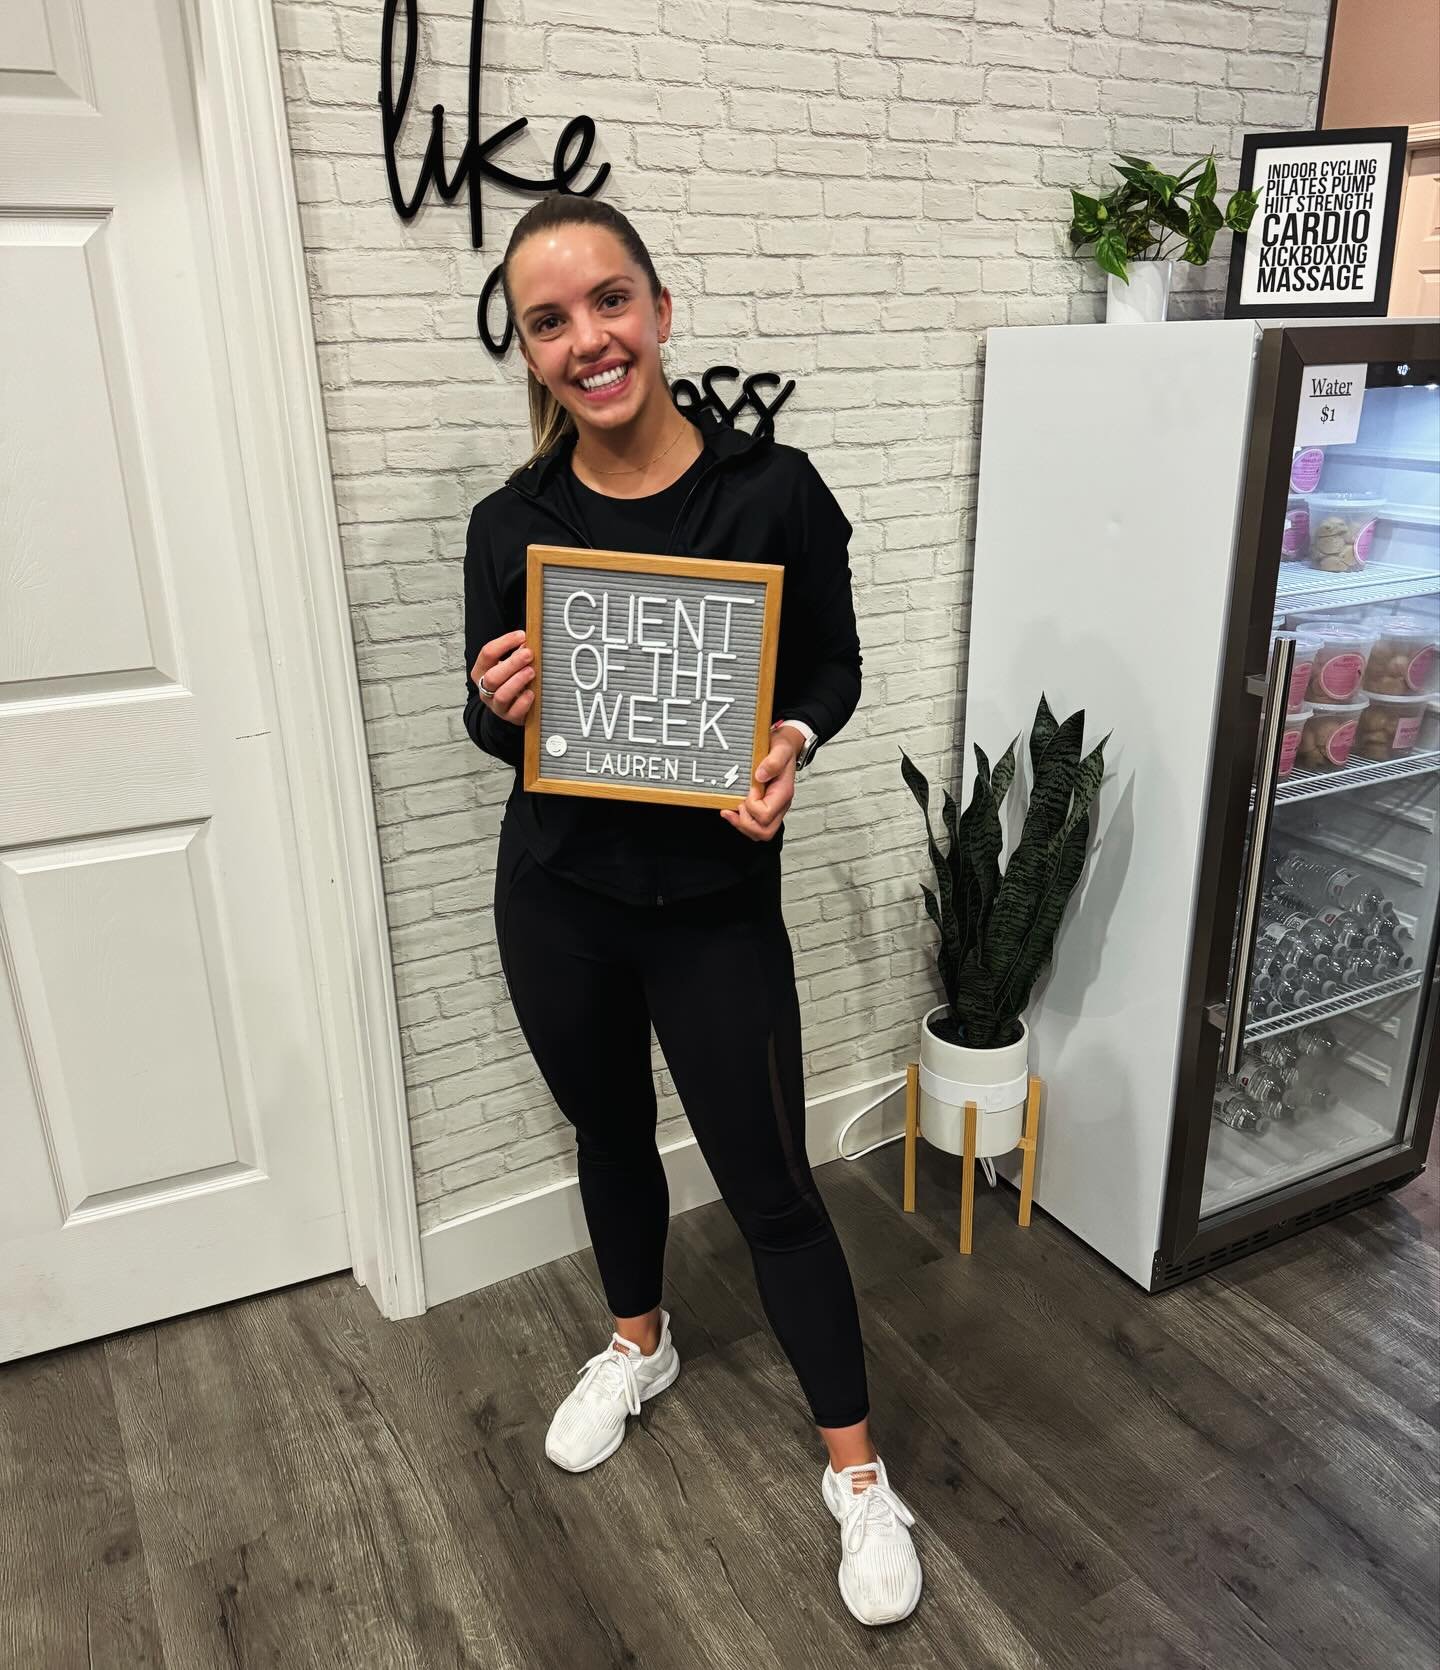 🩷CLIENT OF THE WEEK: Lauren 👑

Lauren has that kind of smile and energy that lights up a room when she walks in ✨ Not only is she sweet as pie 🥧 but she is a BAD ASS athlete! I&rsquo;m not kidding when I say she could go toe to toe with the best o